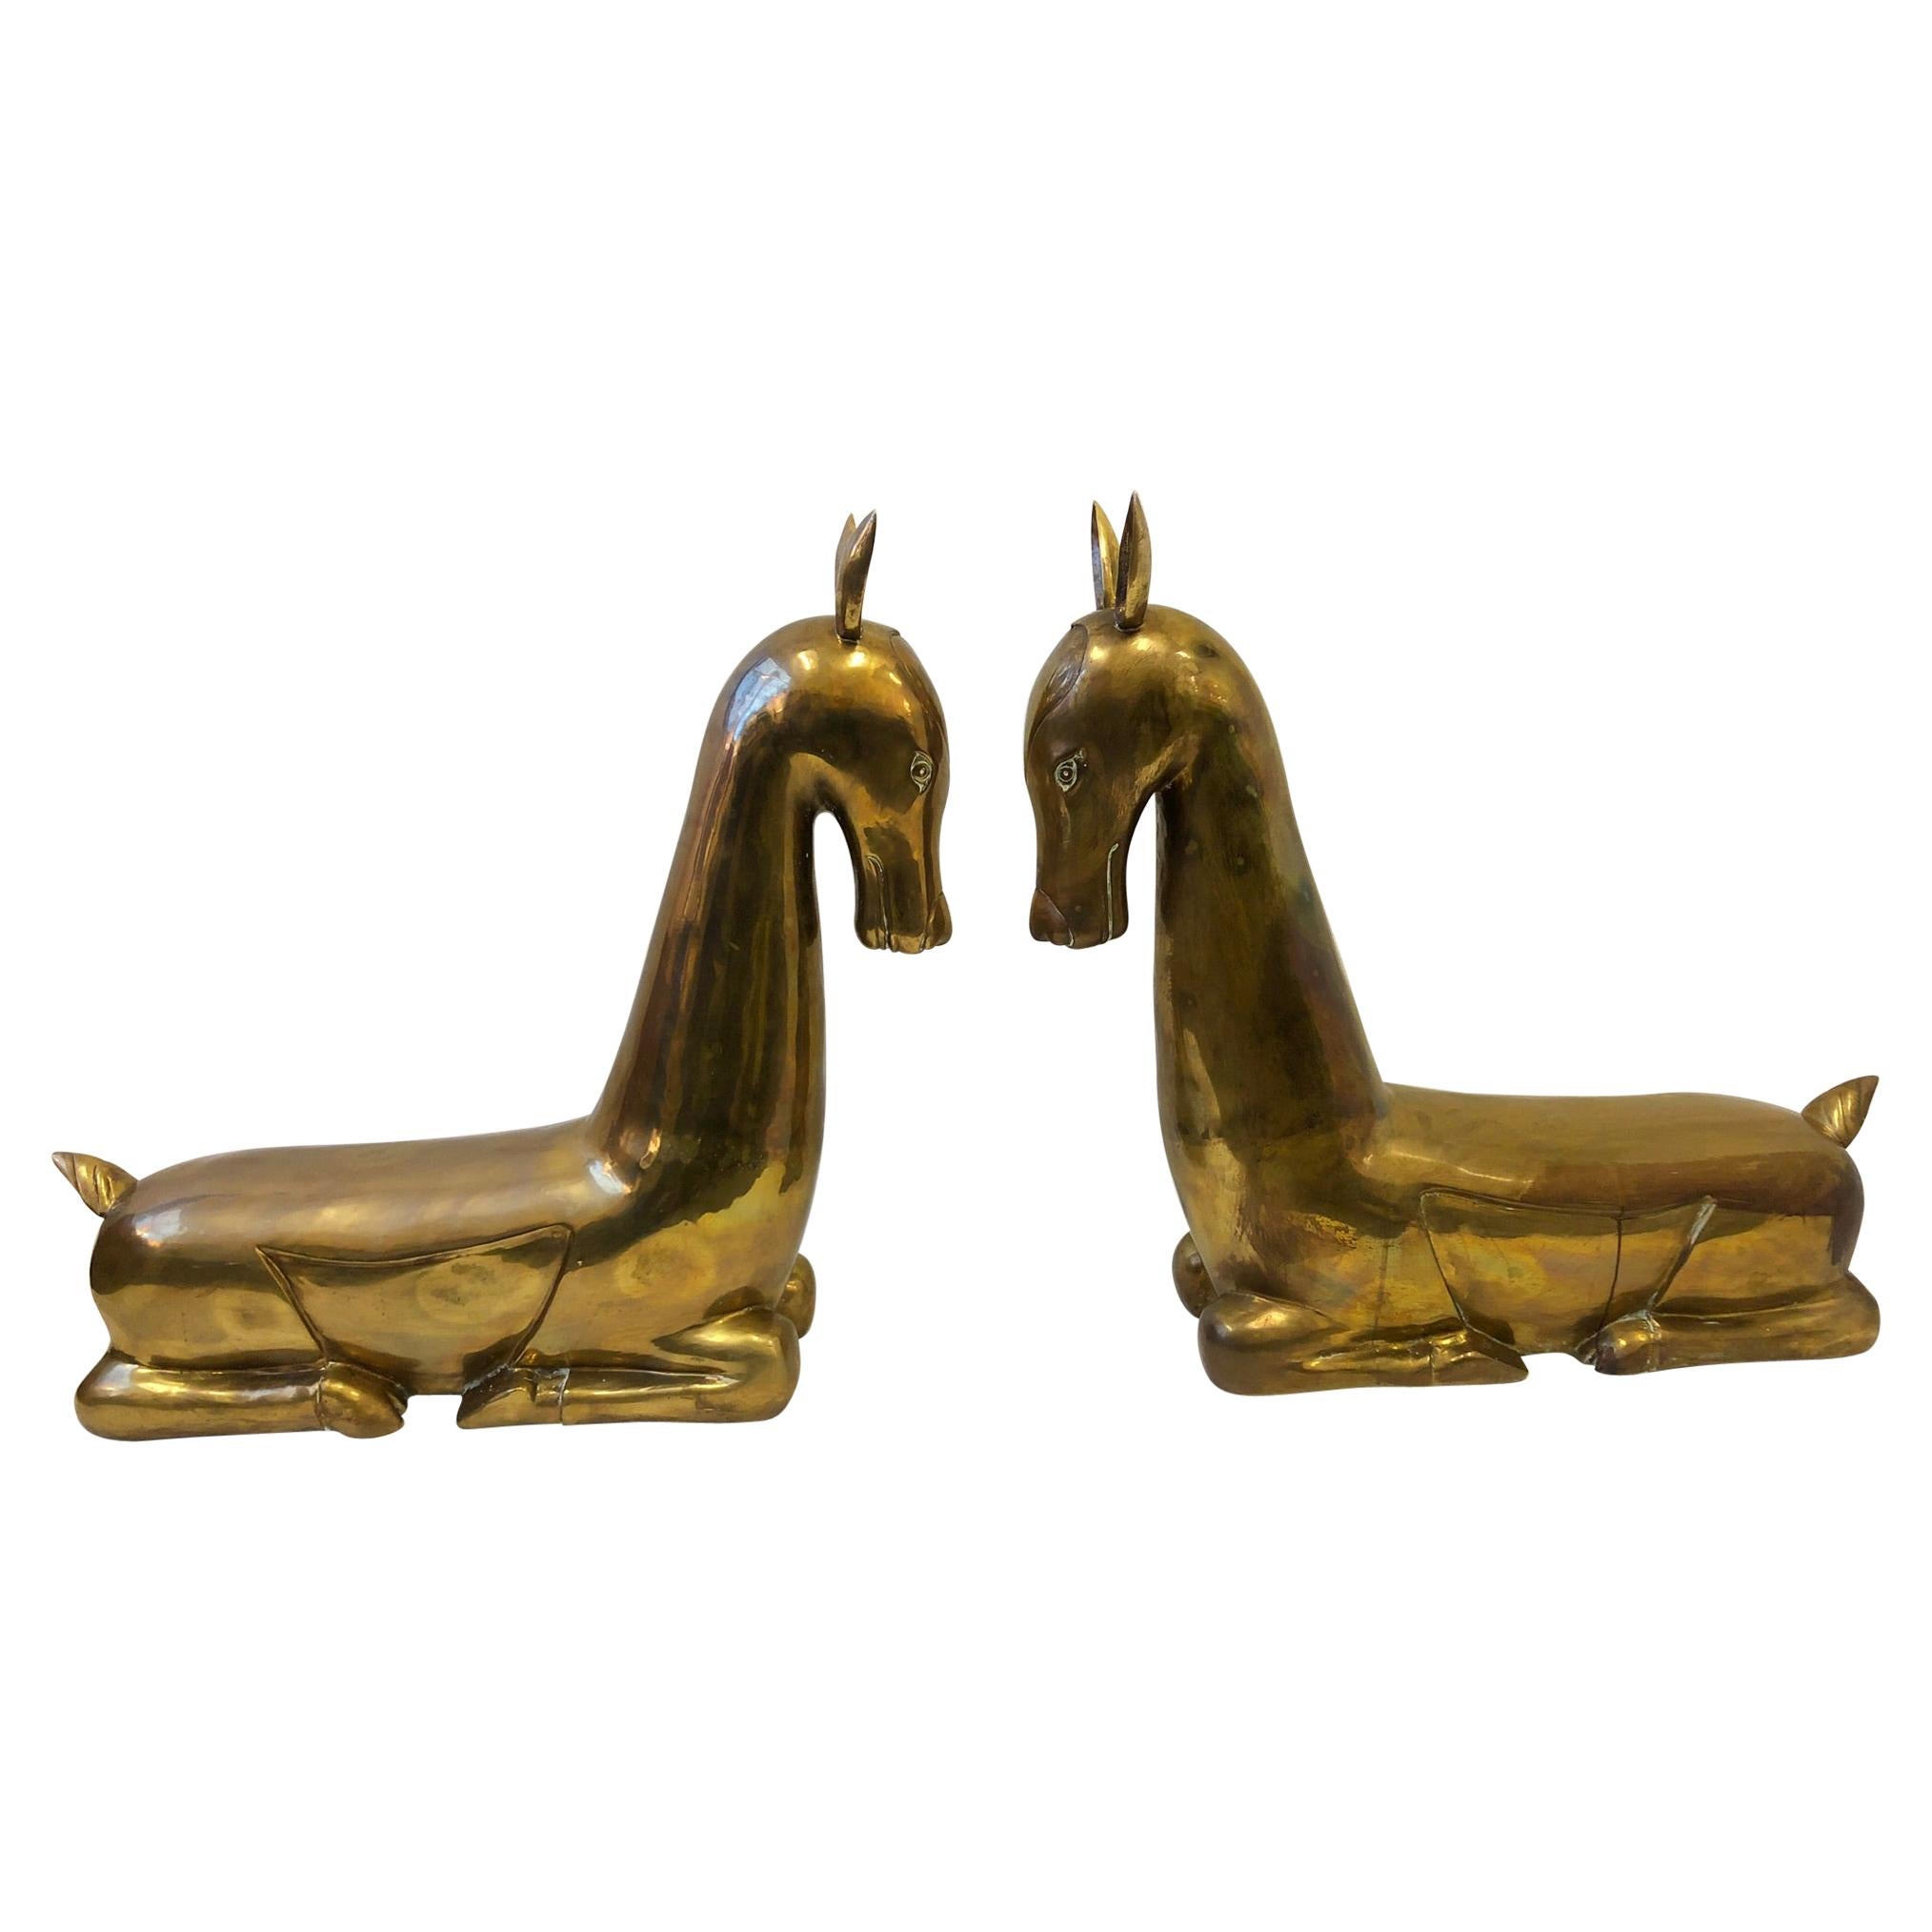 Pair of Stylized Brass Deer from the 1970s